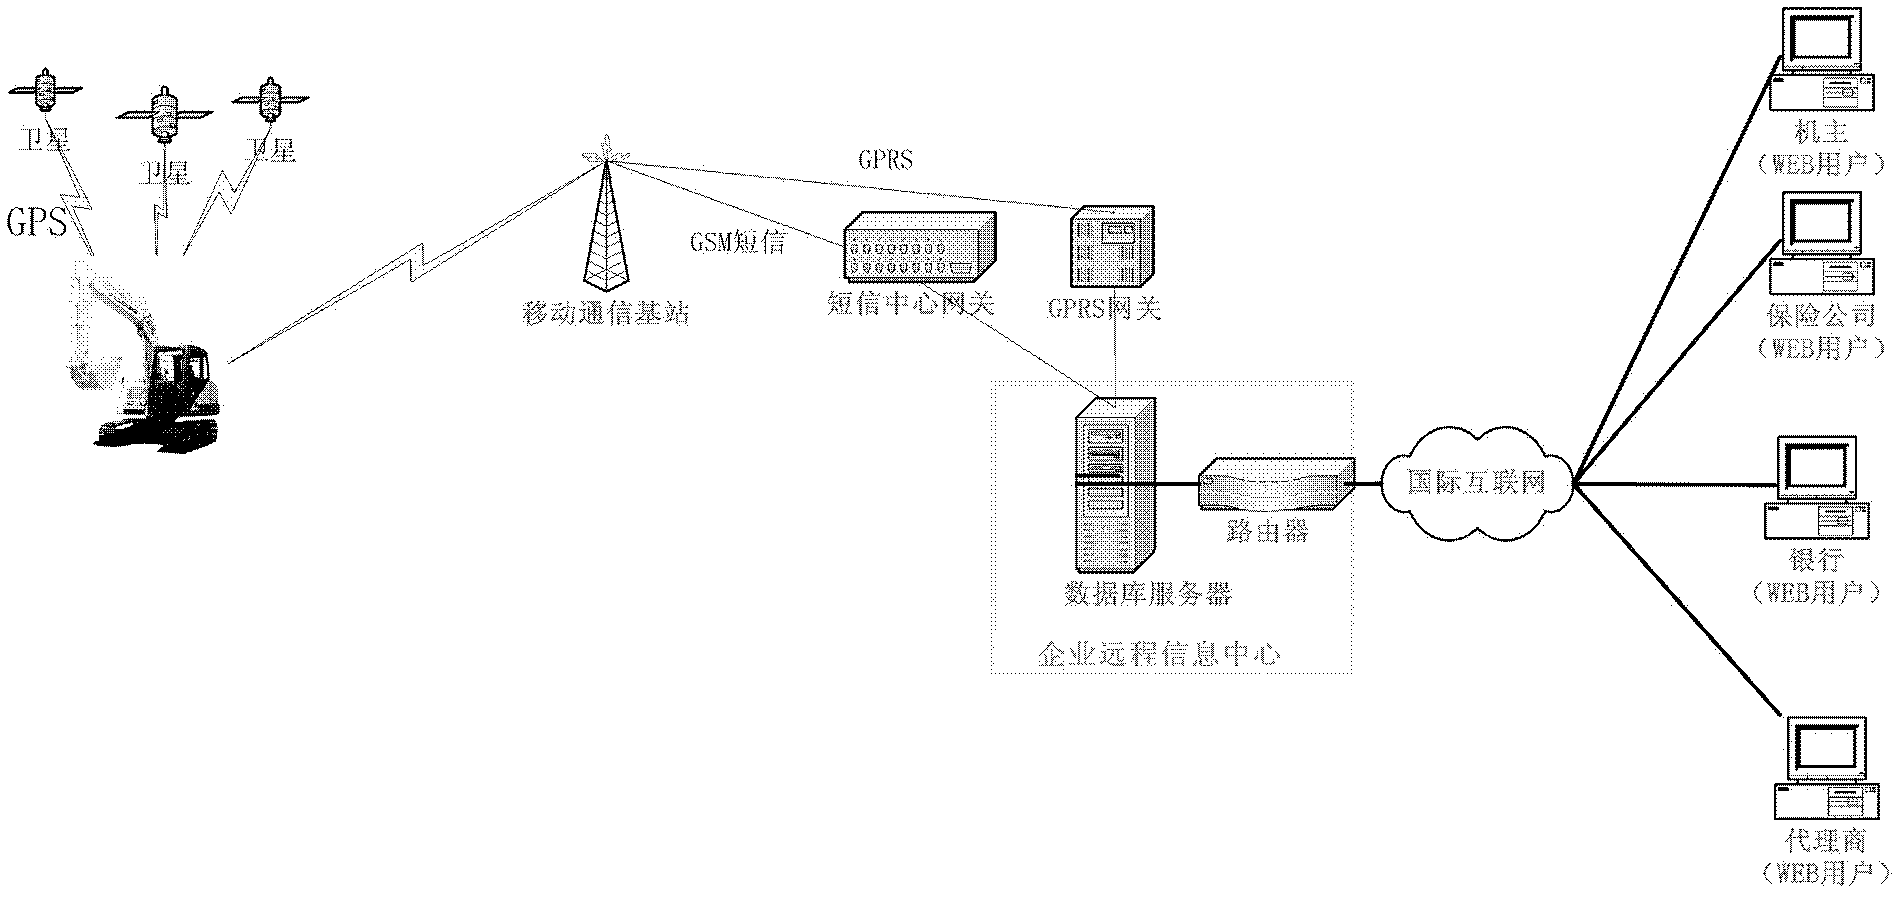 Electronic identity recognition method for engineering machinery and device